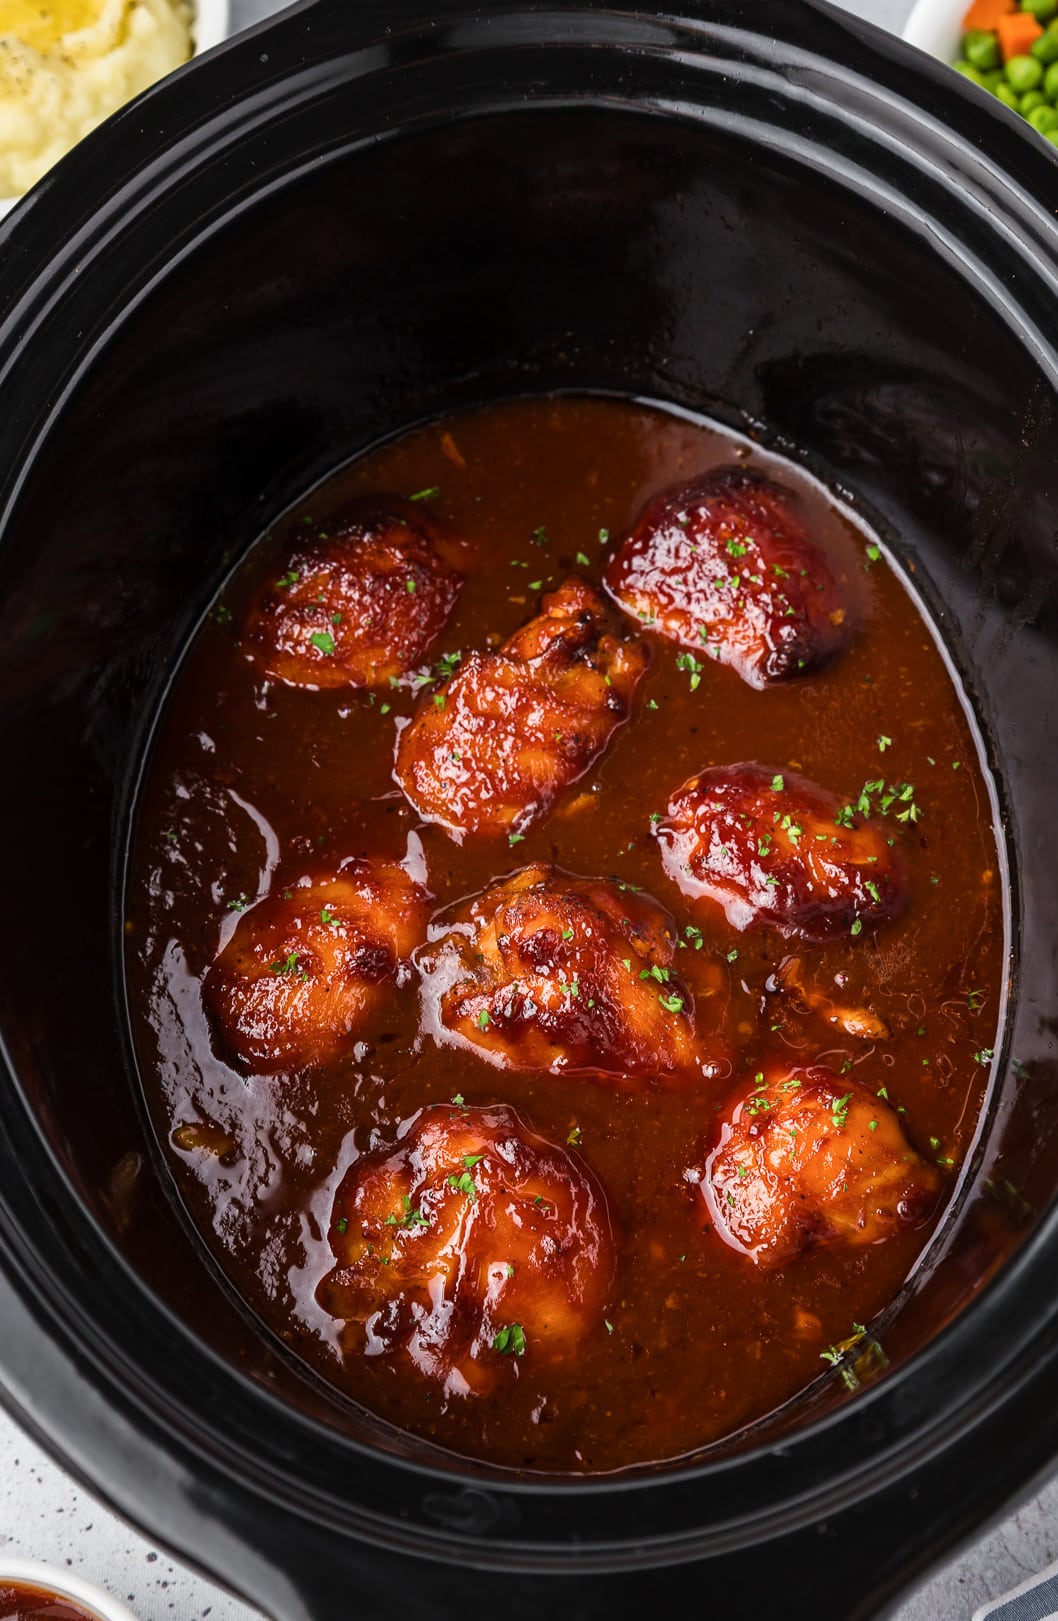 Boneless chicken thighs cooked in bbq sauce close up in a slow cooker from above with other bowls of vegetable next to the crockpot nearby.